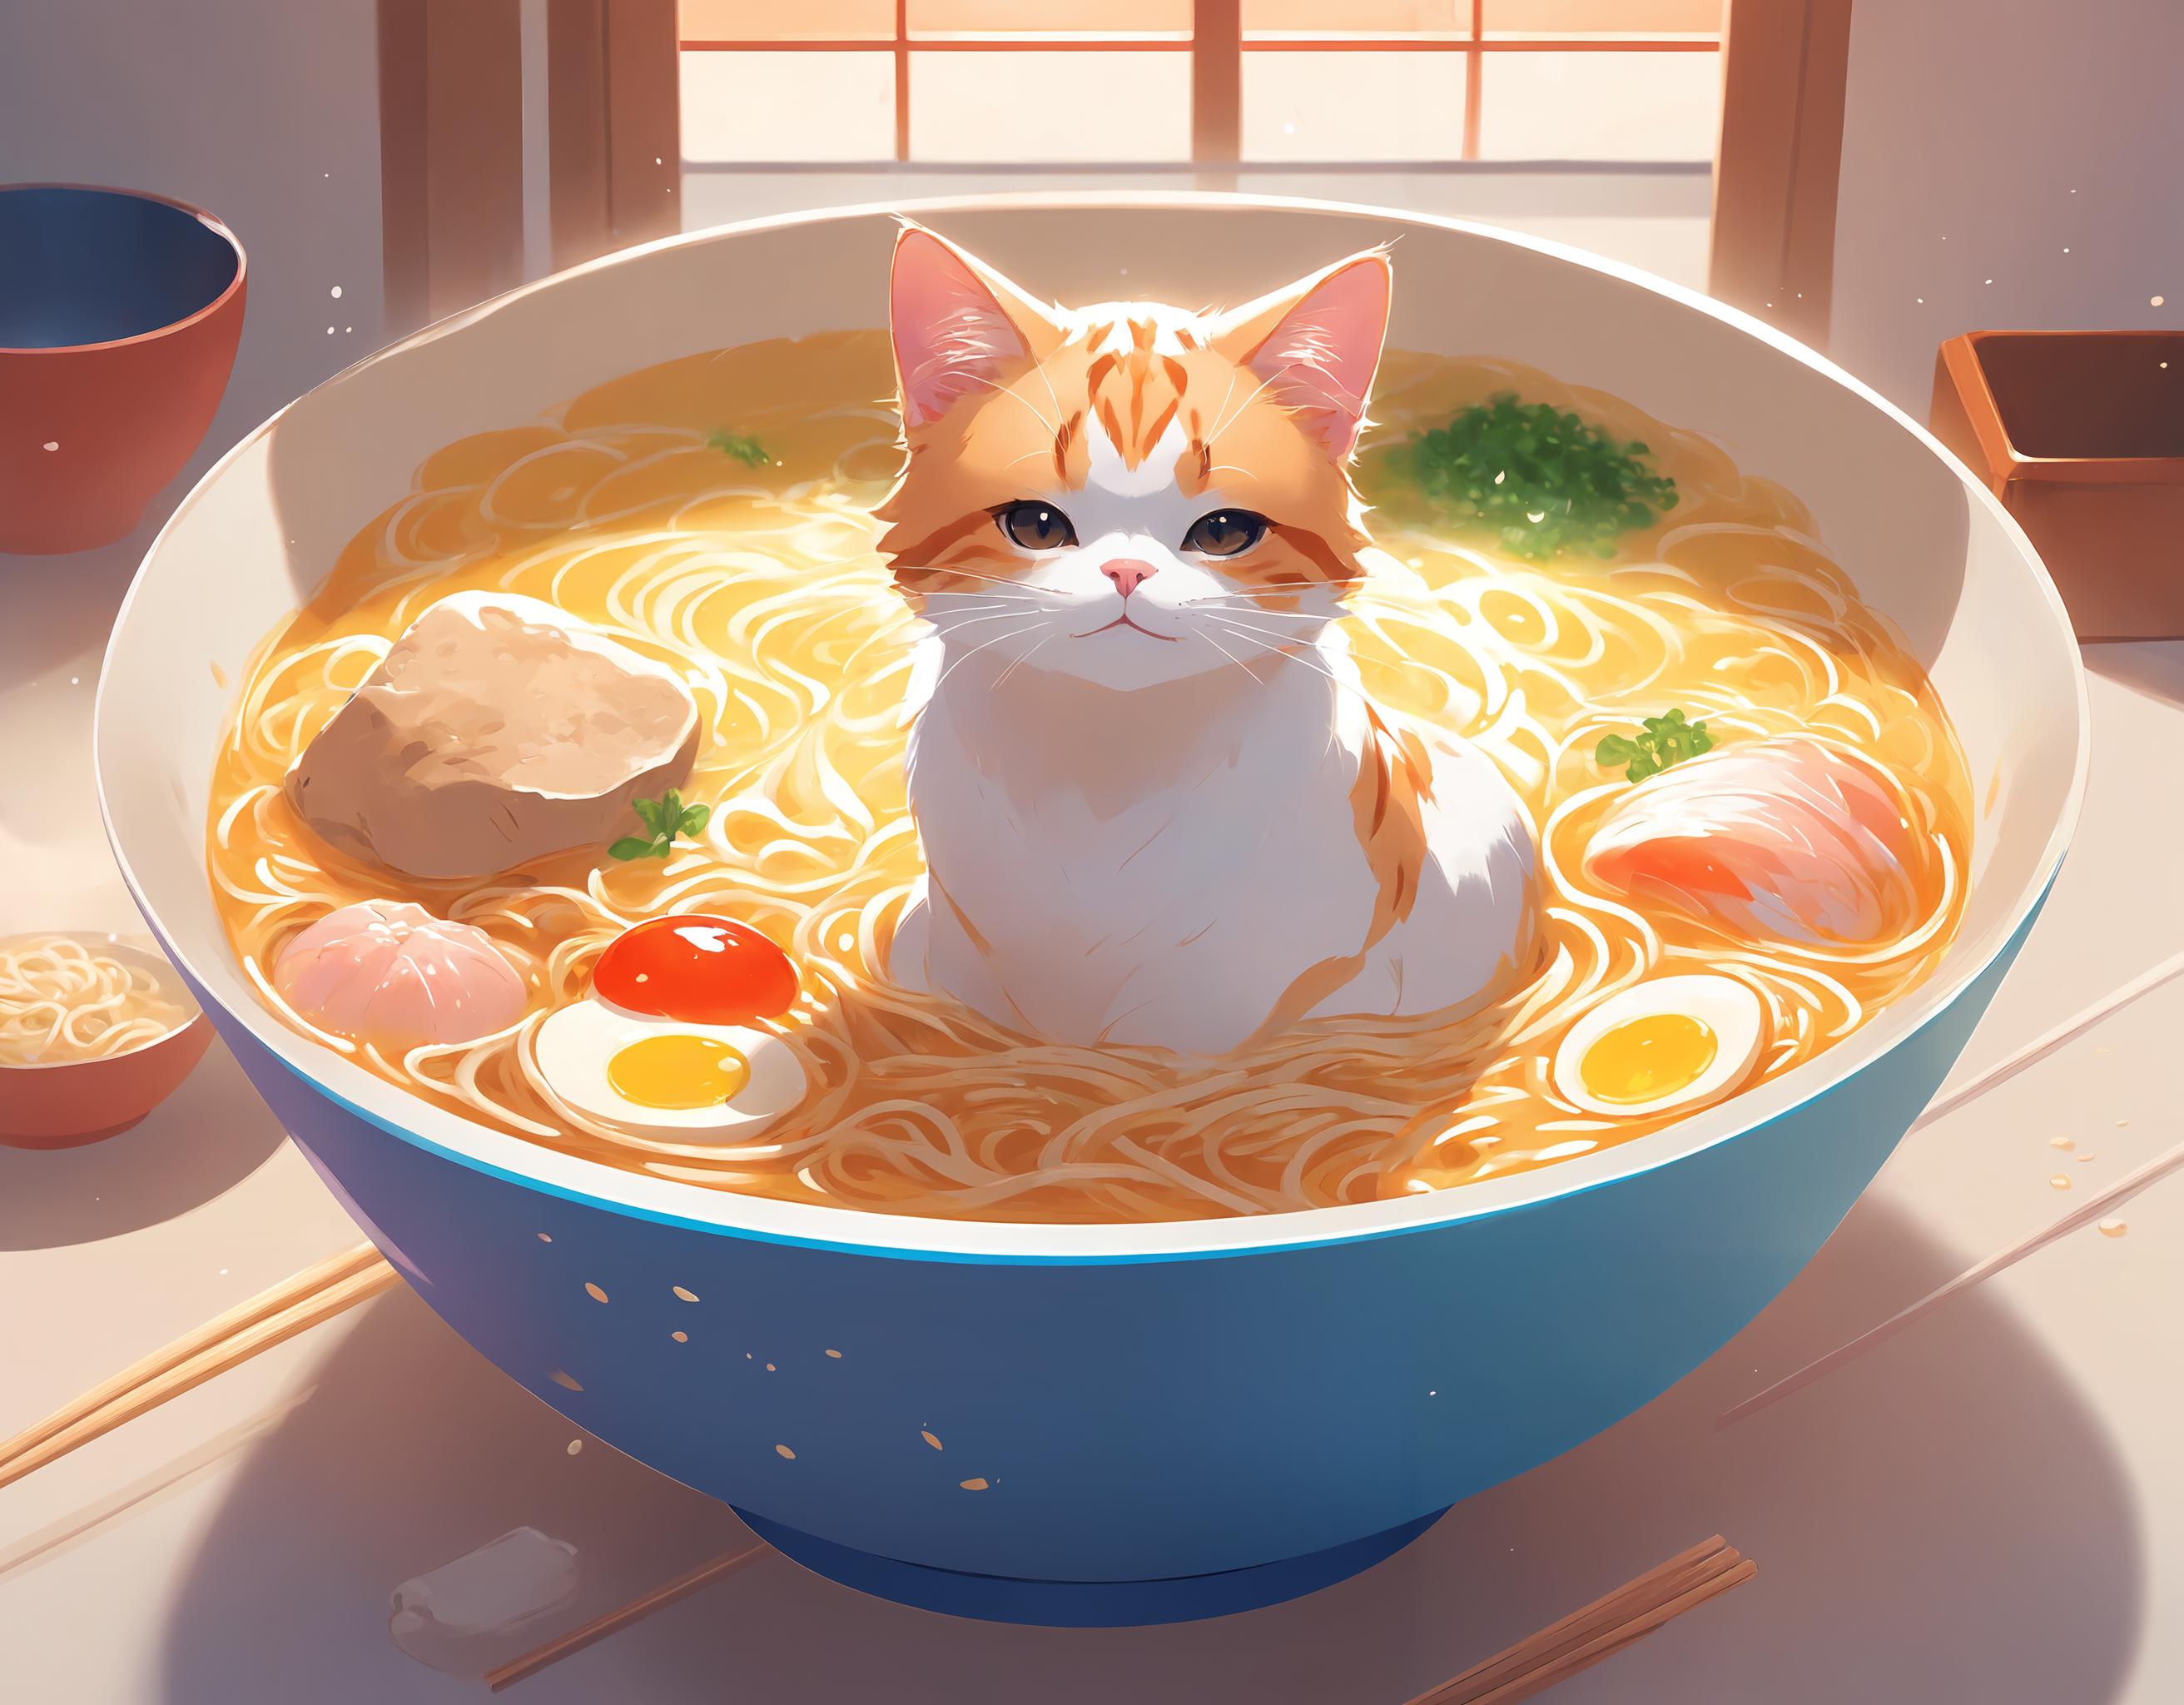 A cartoon image of a cat sitting in a bowl of noodles.